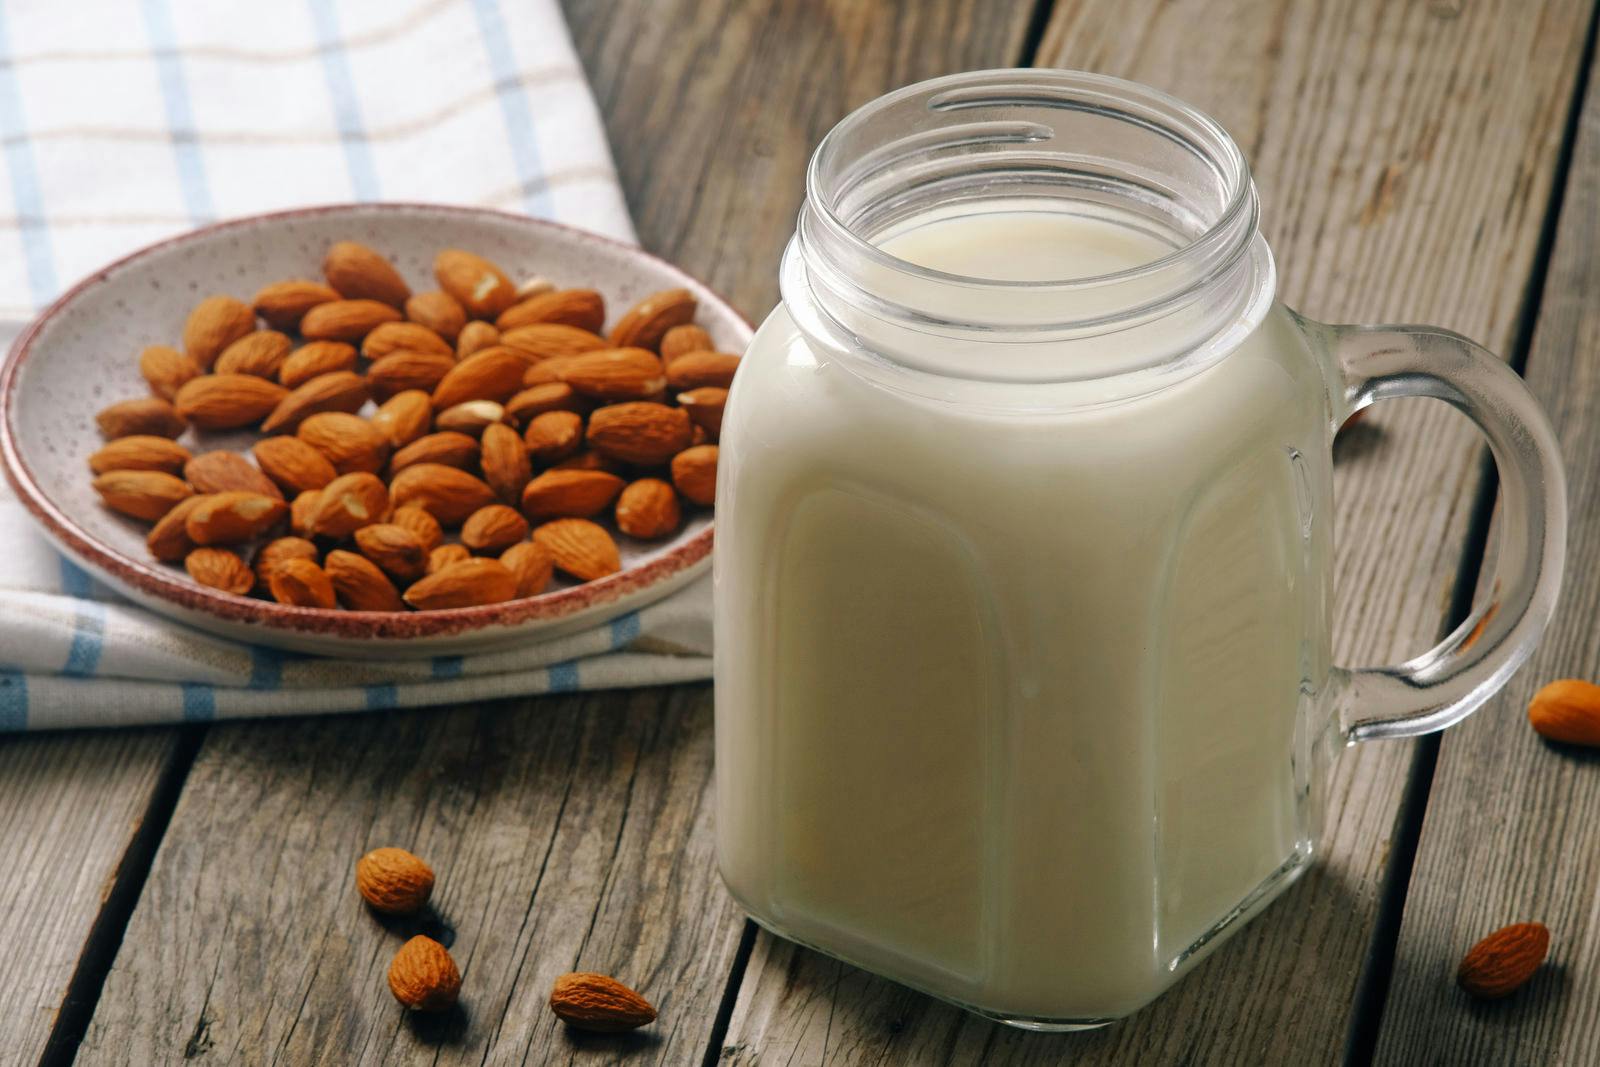 almonds and almond milk on table as part of dairy-free diet